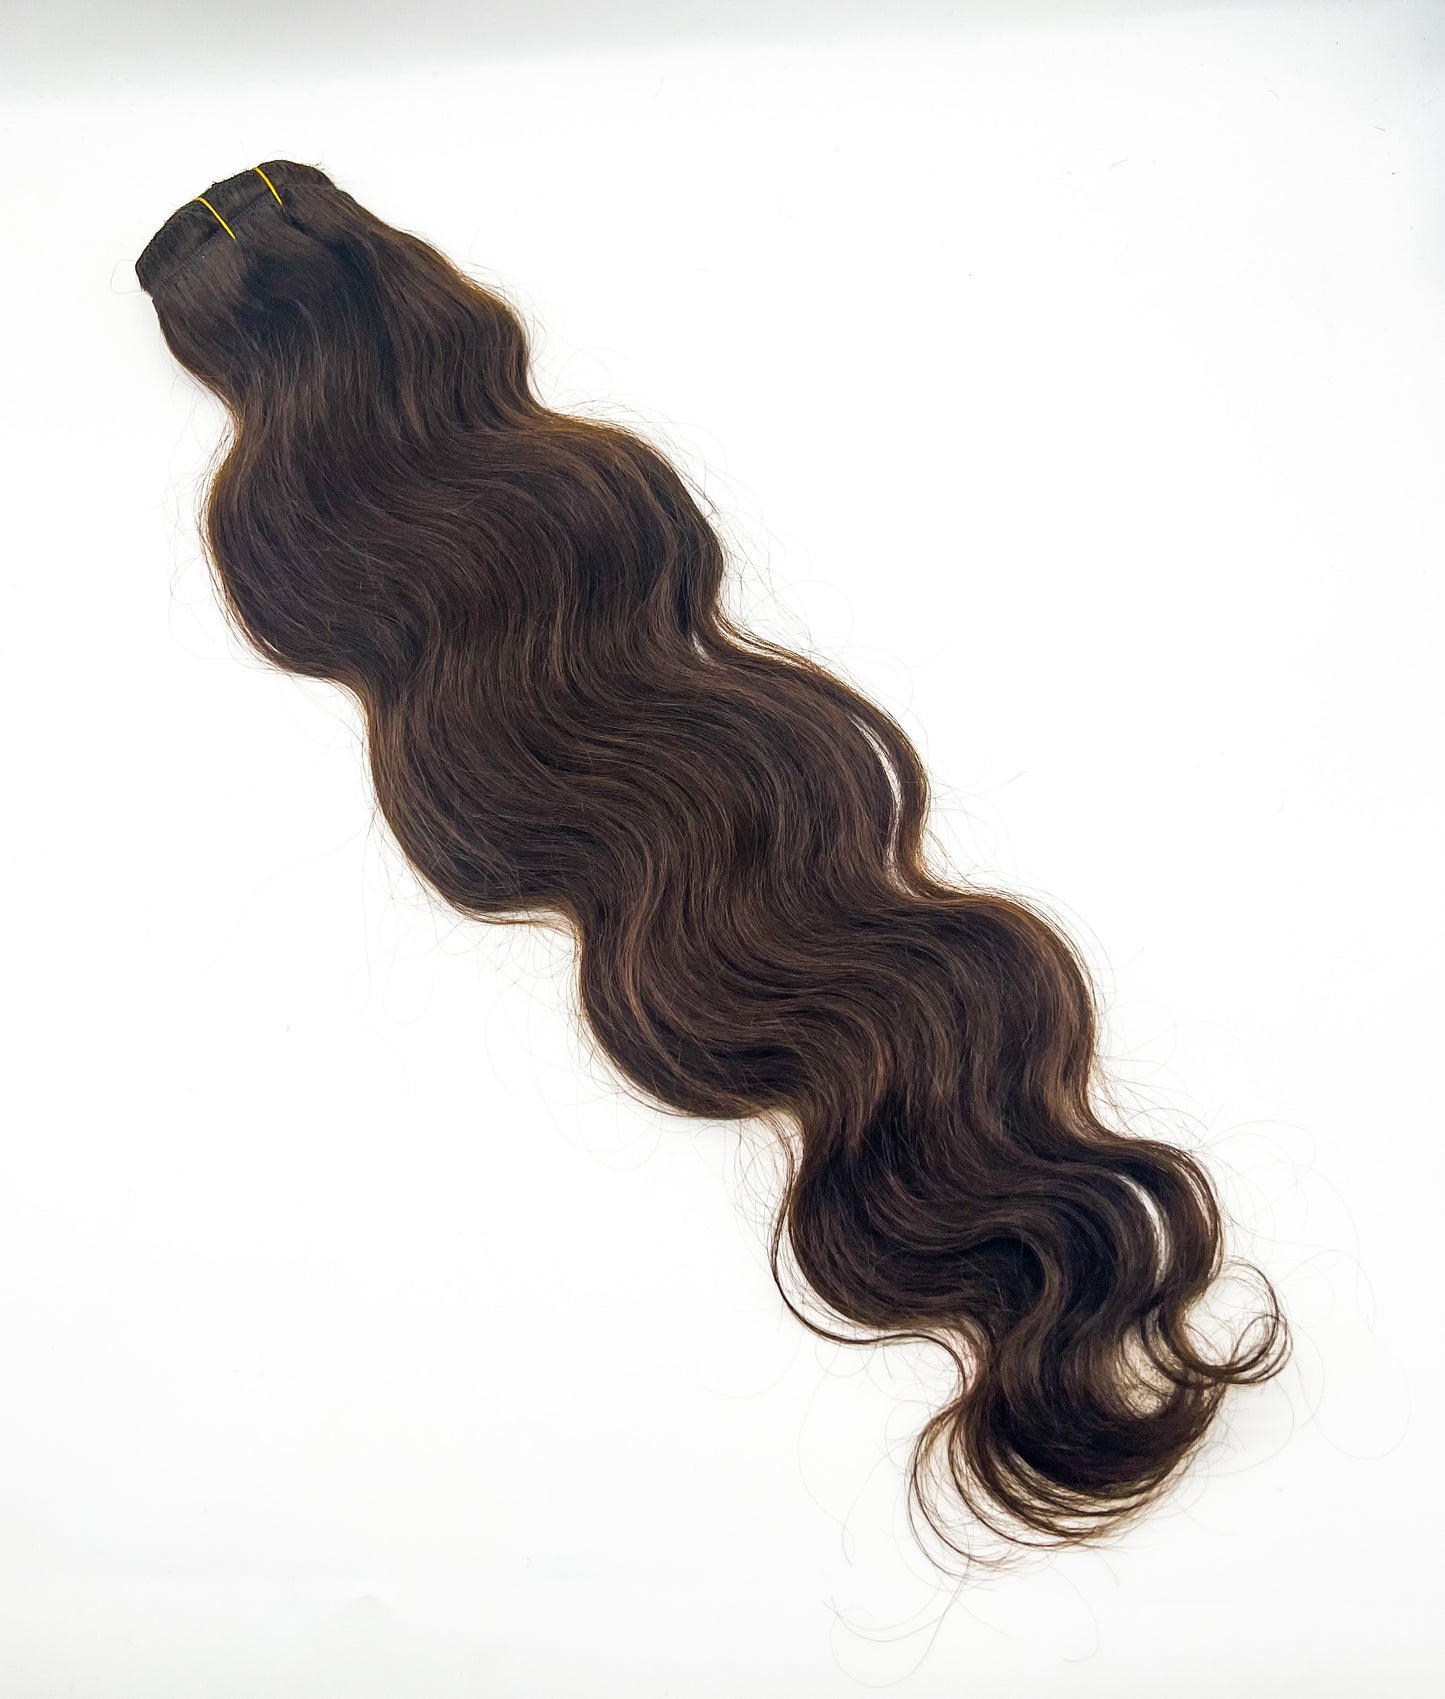 VIP Clip Extensions / Body Wave - 24'' (170 g ) - ClipeX System